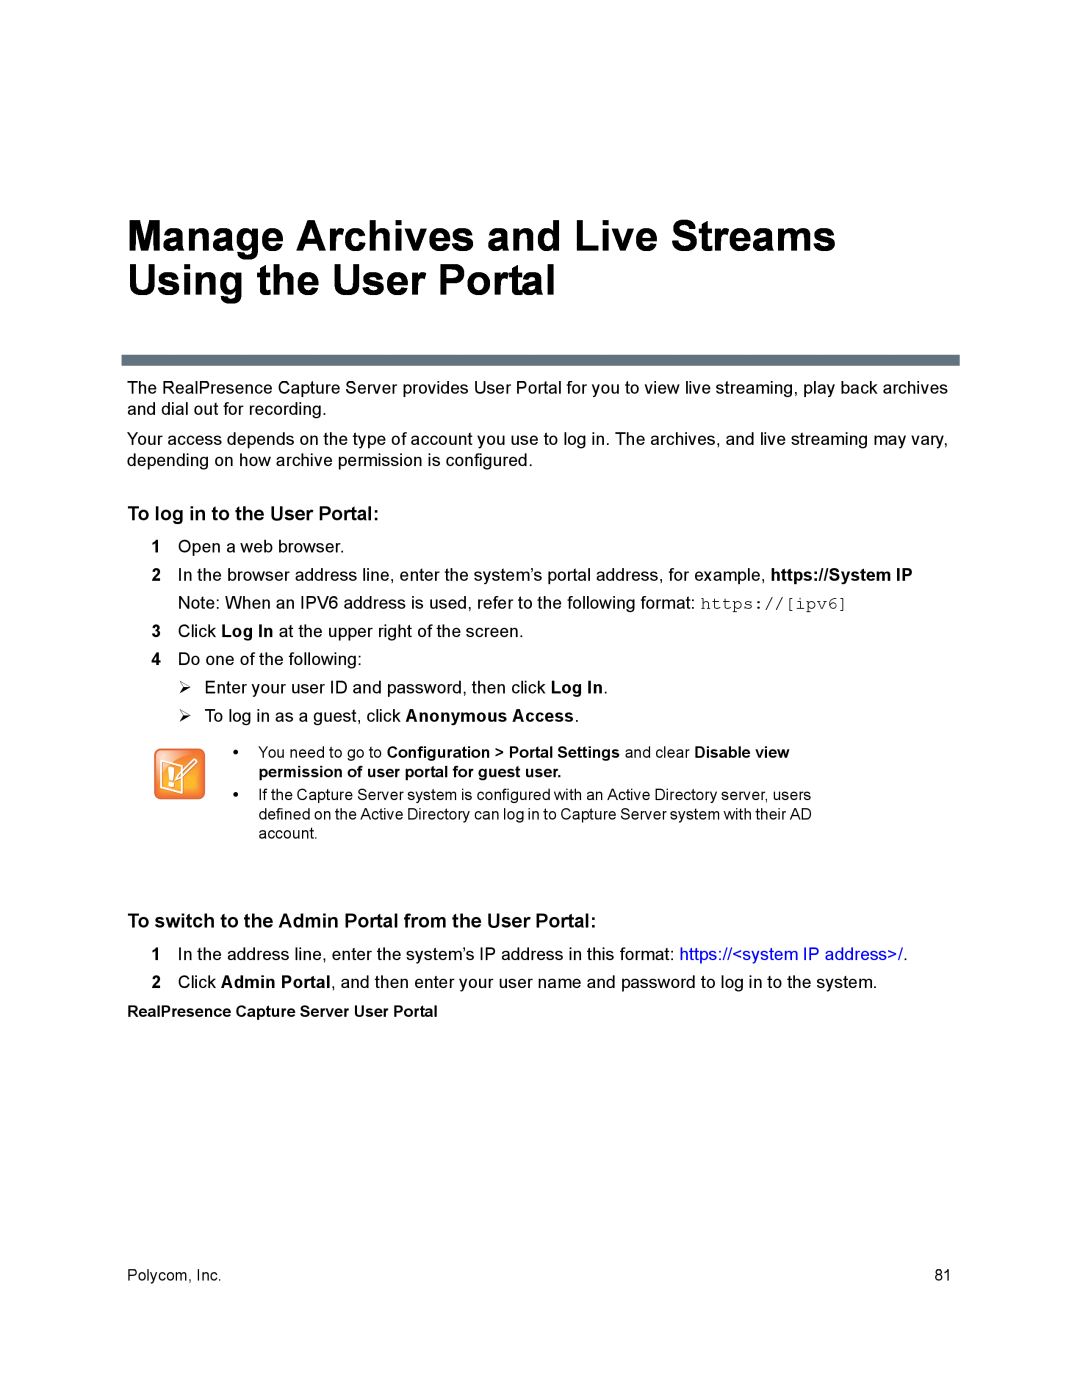 Polycom 40/0 manual Manage Archives and Live Streams Using the User Portal, To log in to the User Portal 